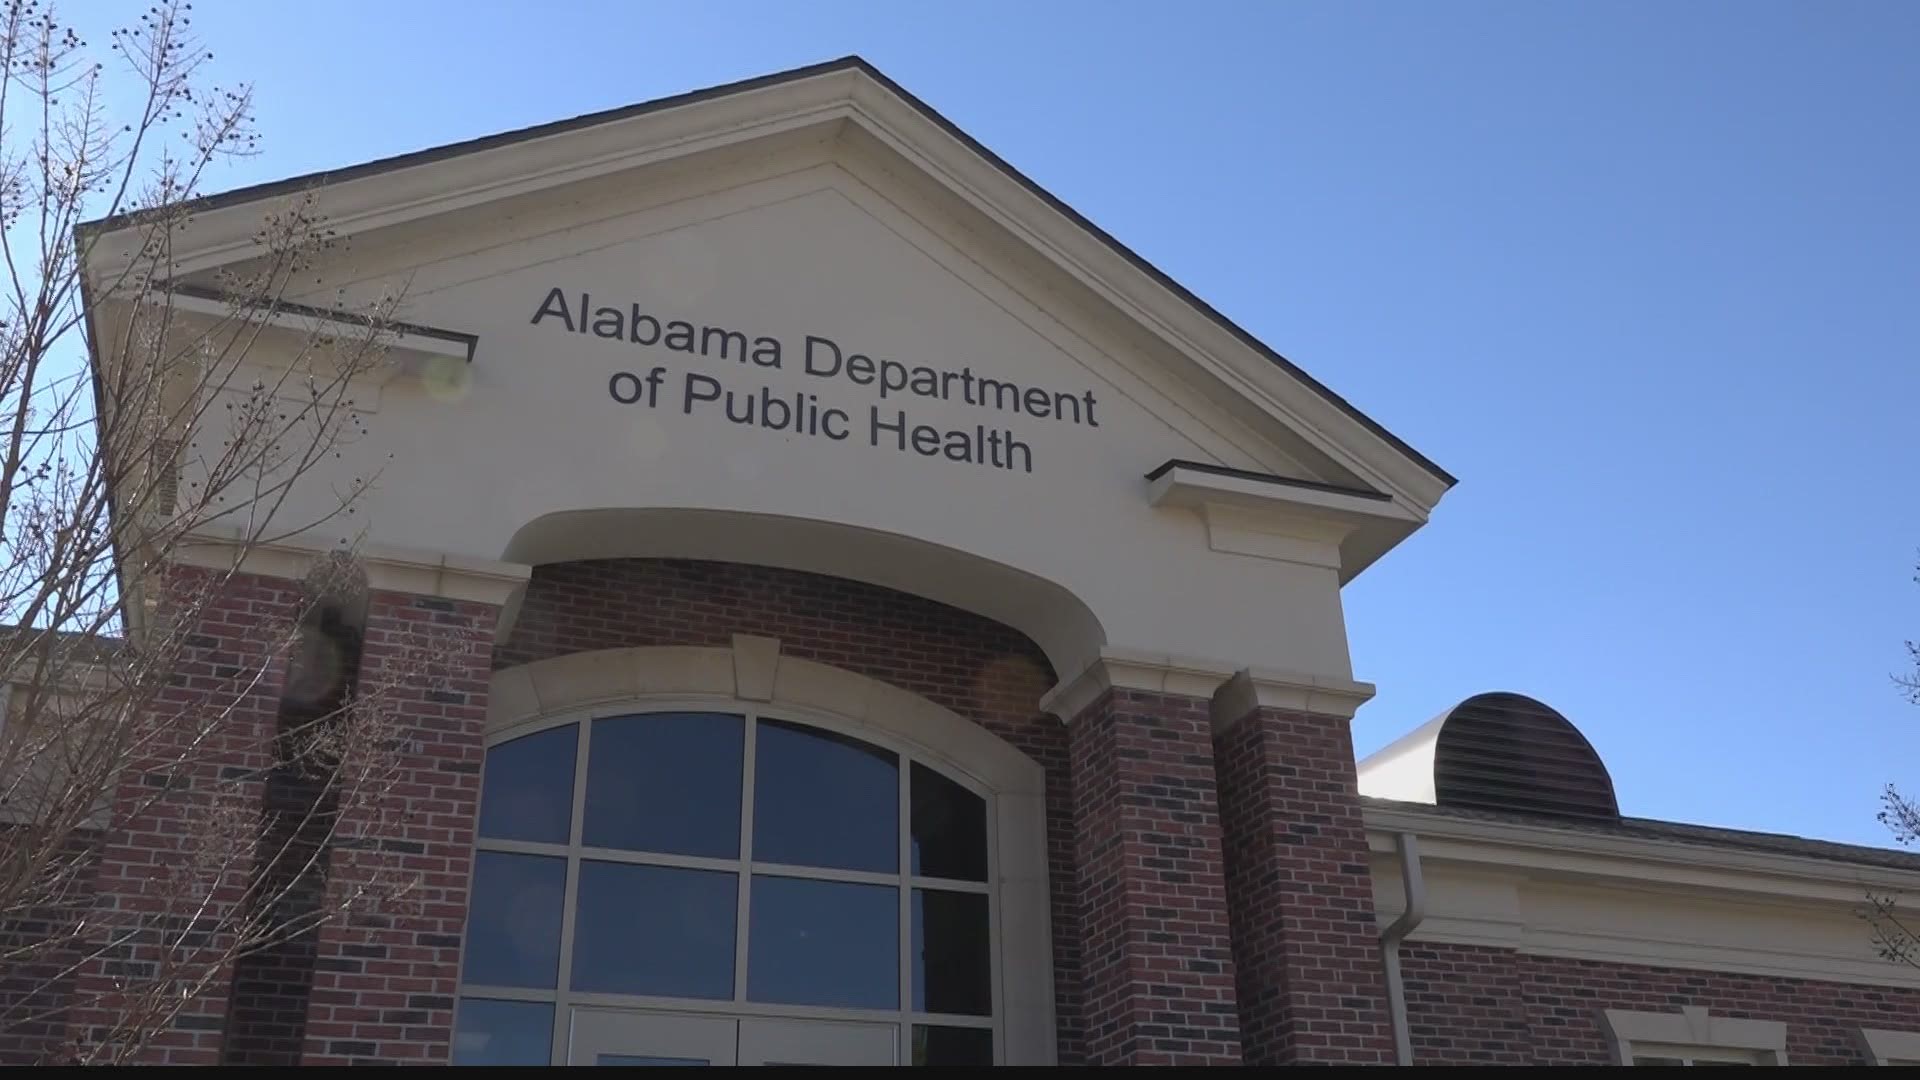 The Morgan County Health Department is starting to vaccinate people ages 75 and older that want to receive the COVID vaccine.